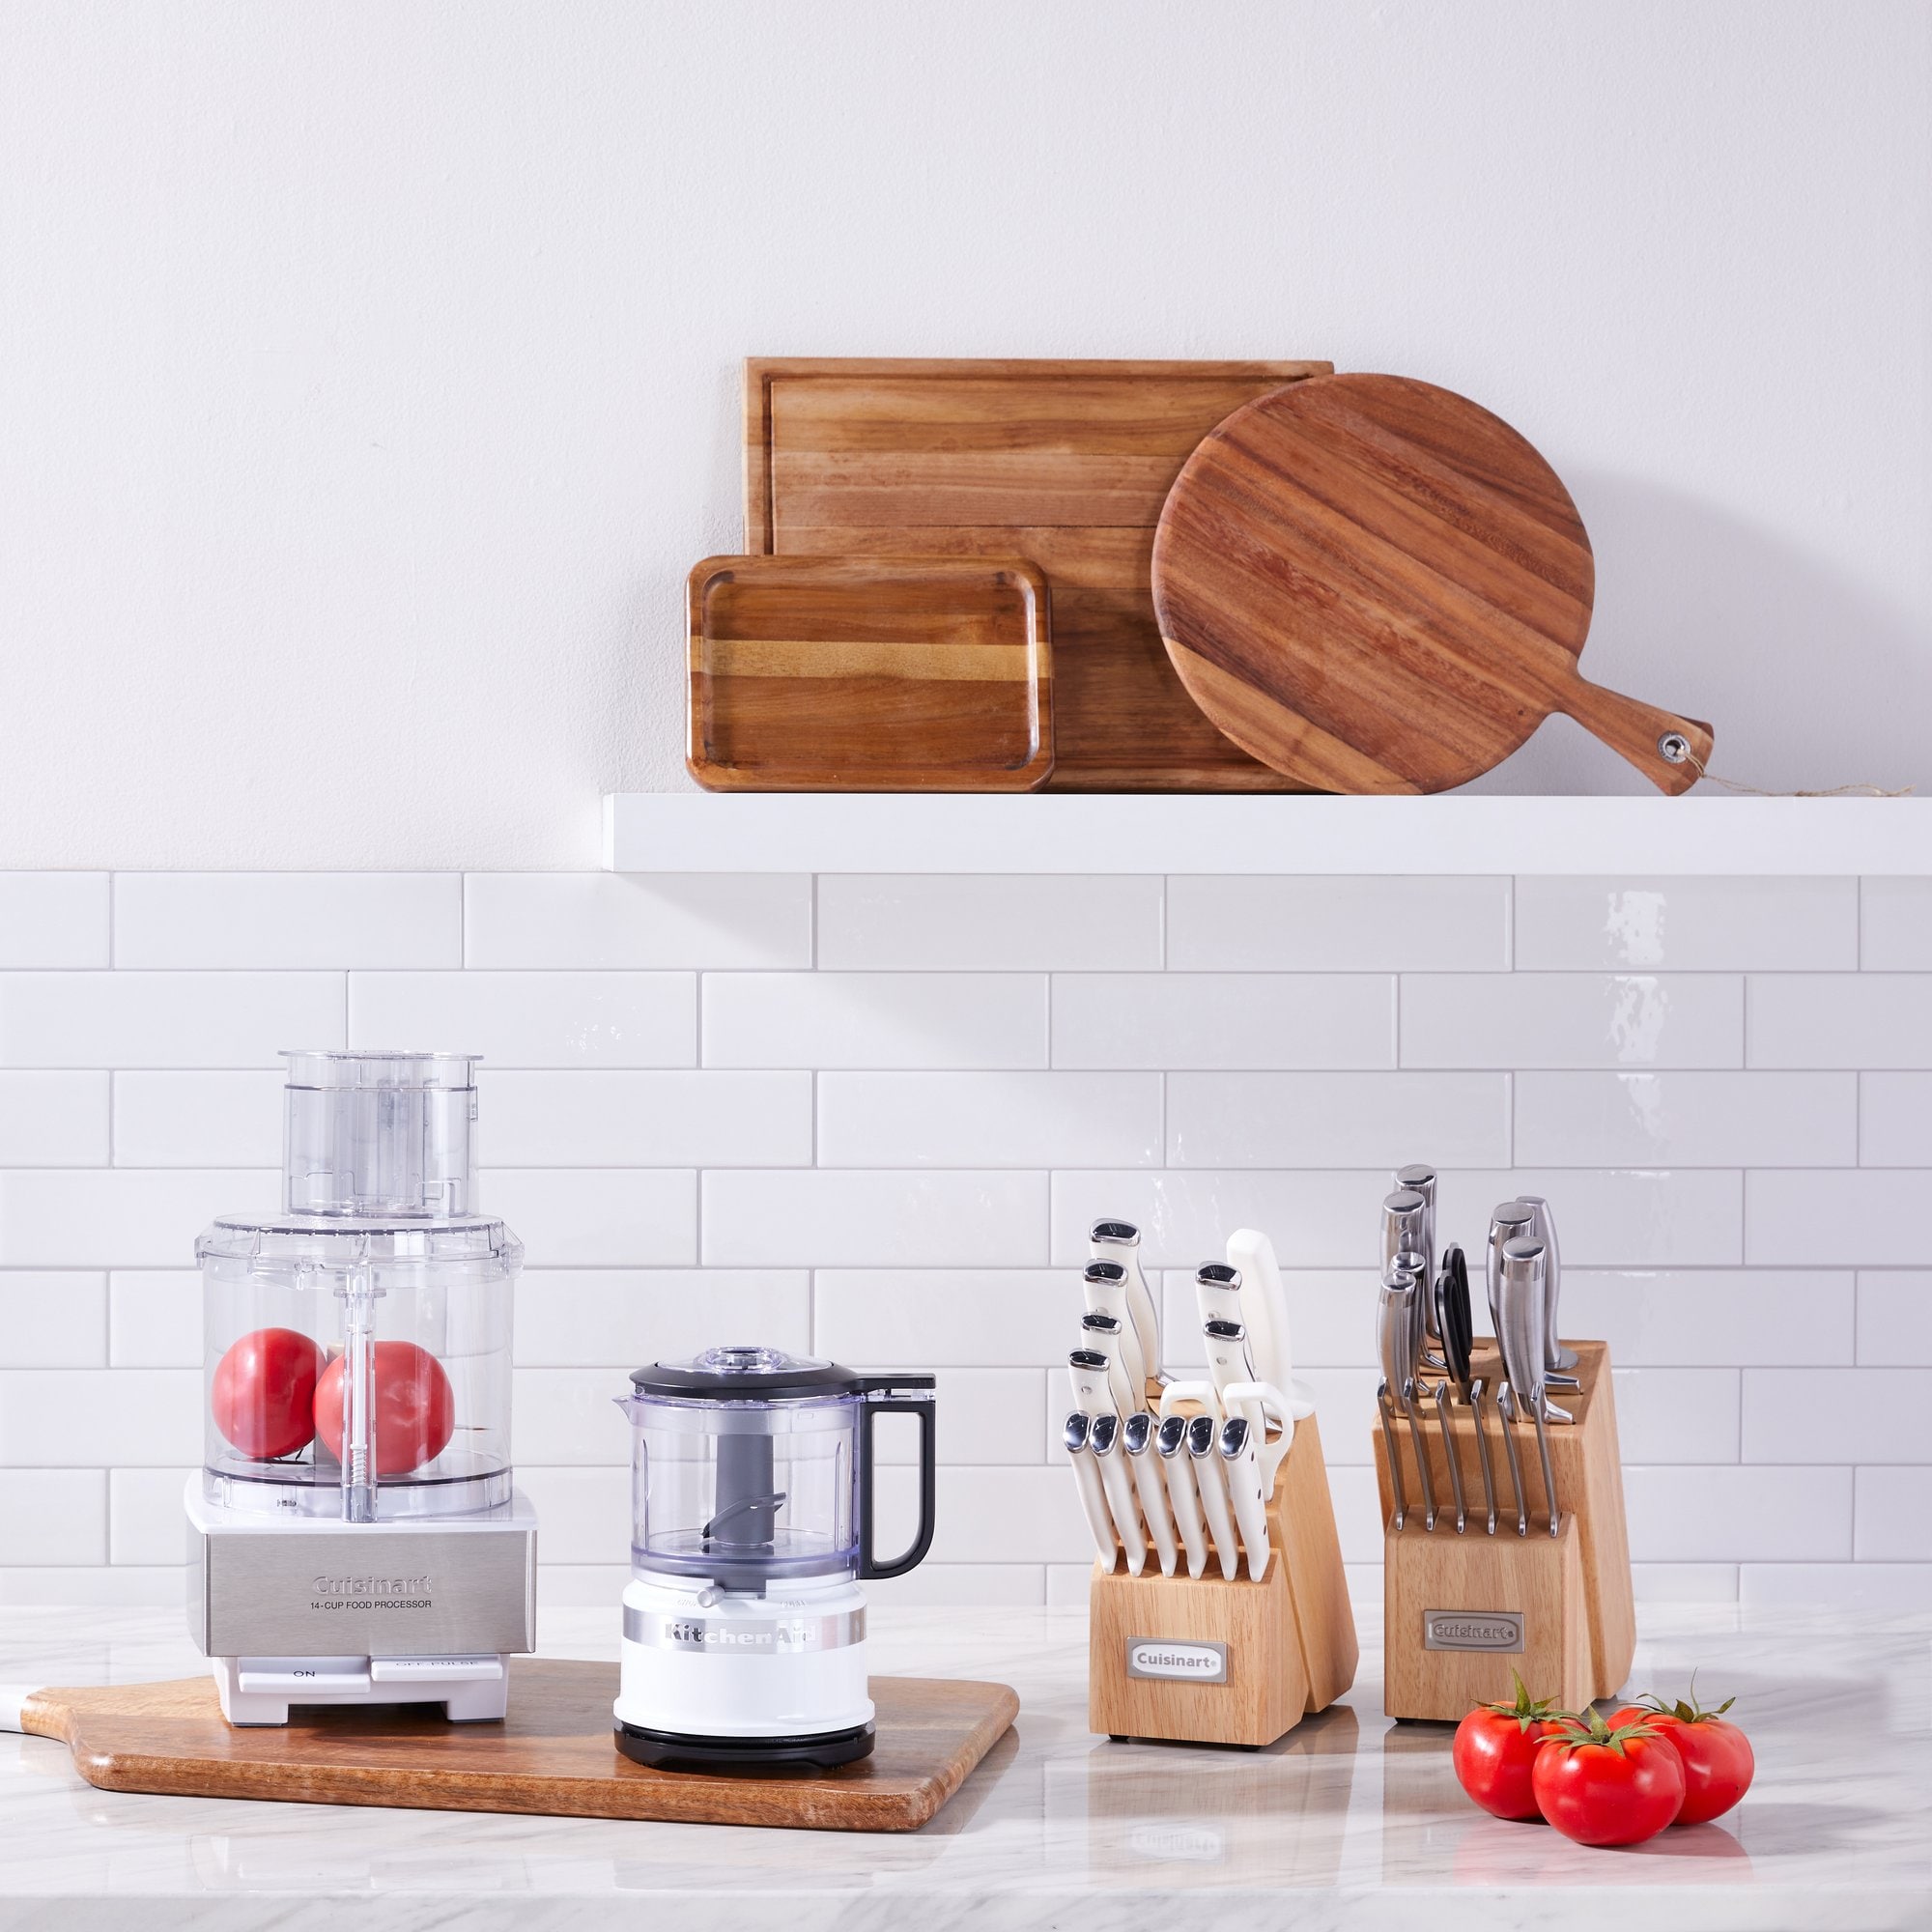 save an extra 10% on Select Kitchen & Dining*